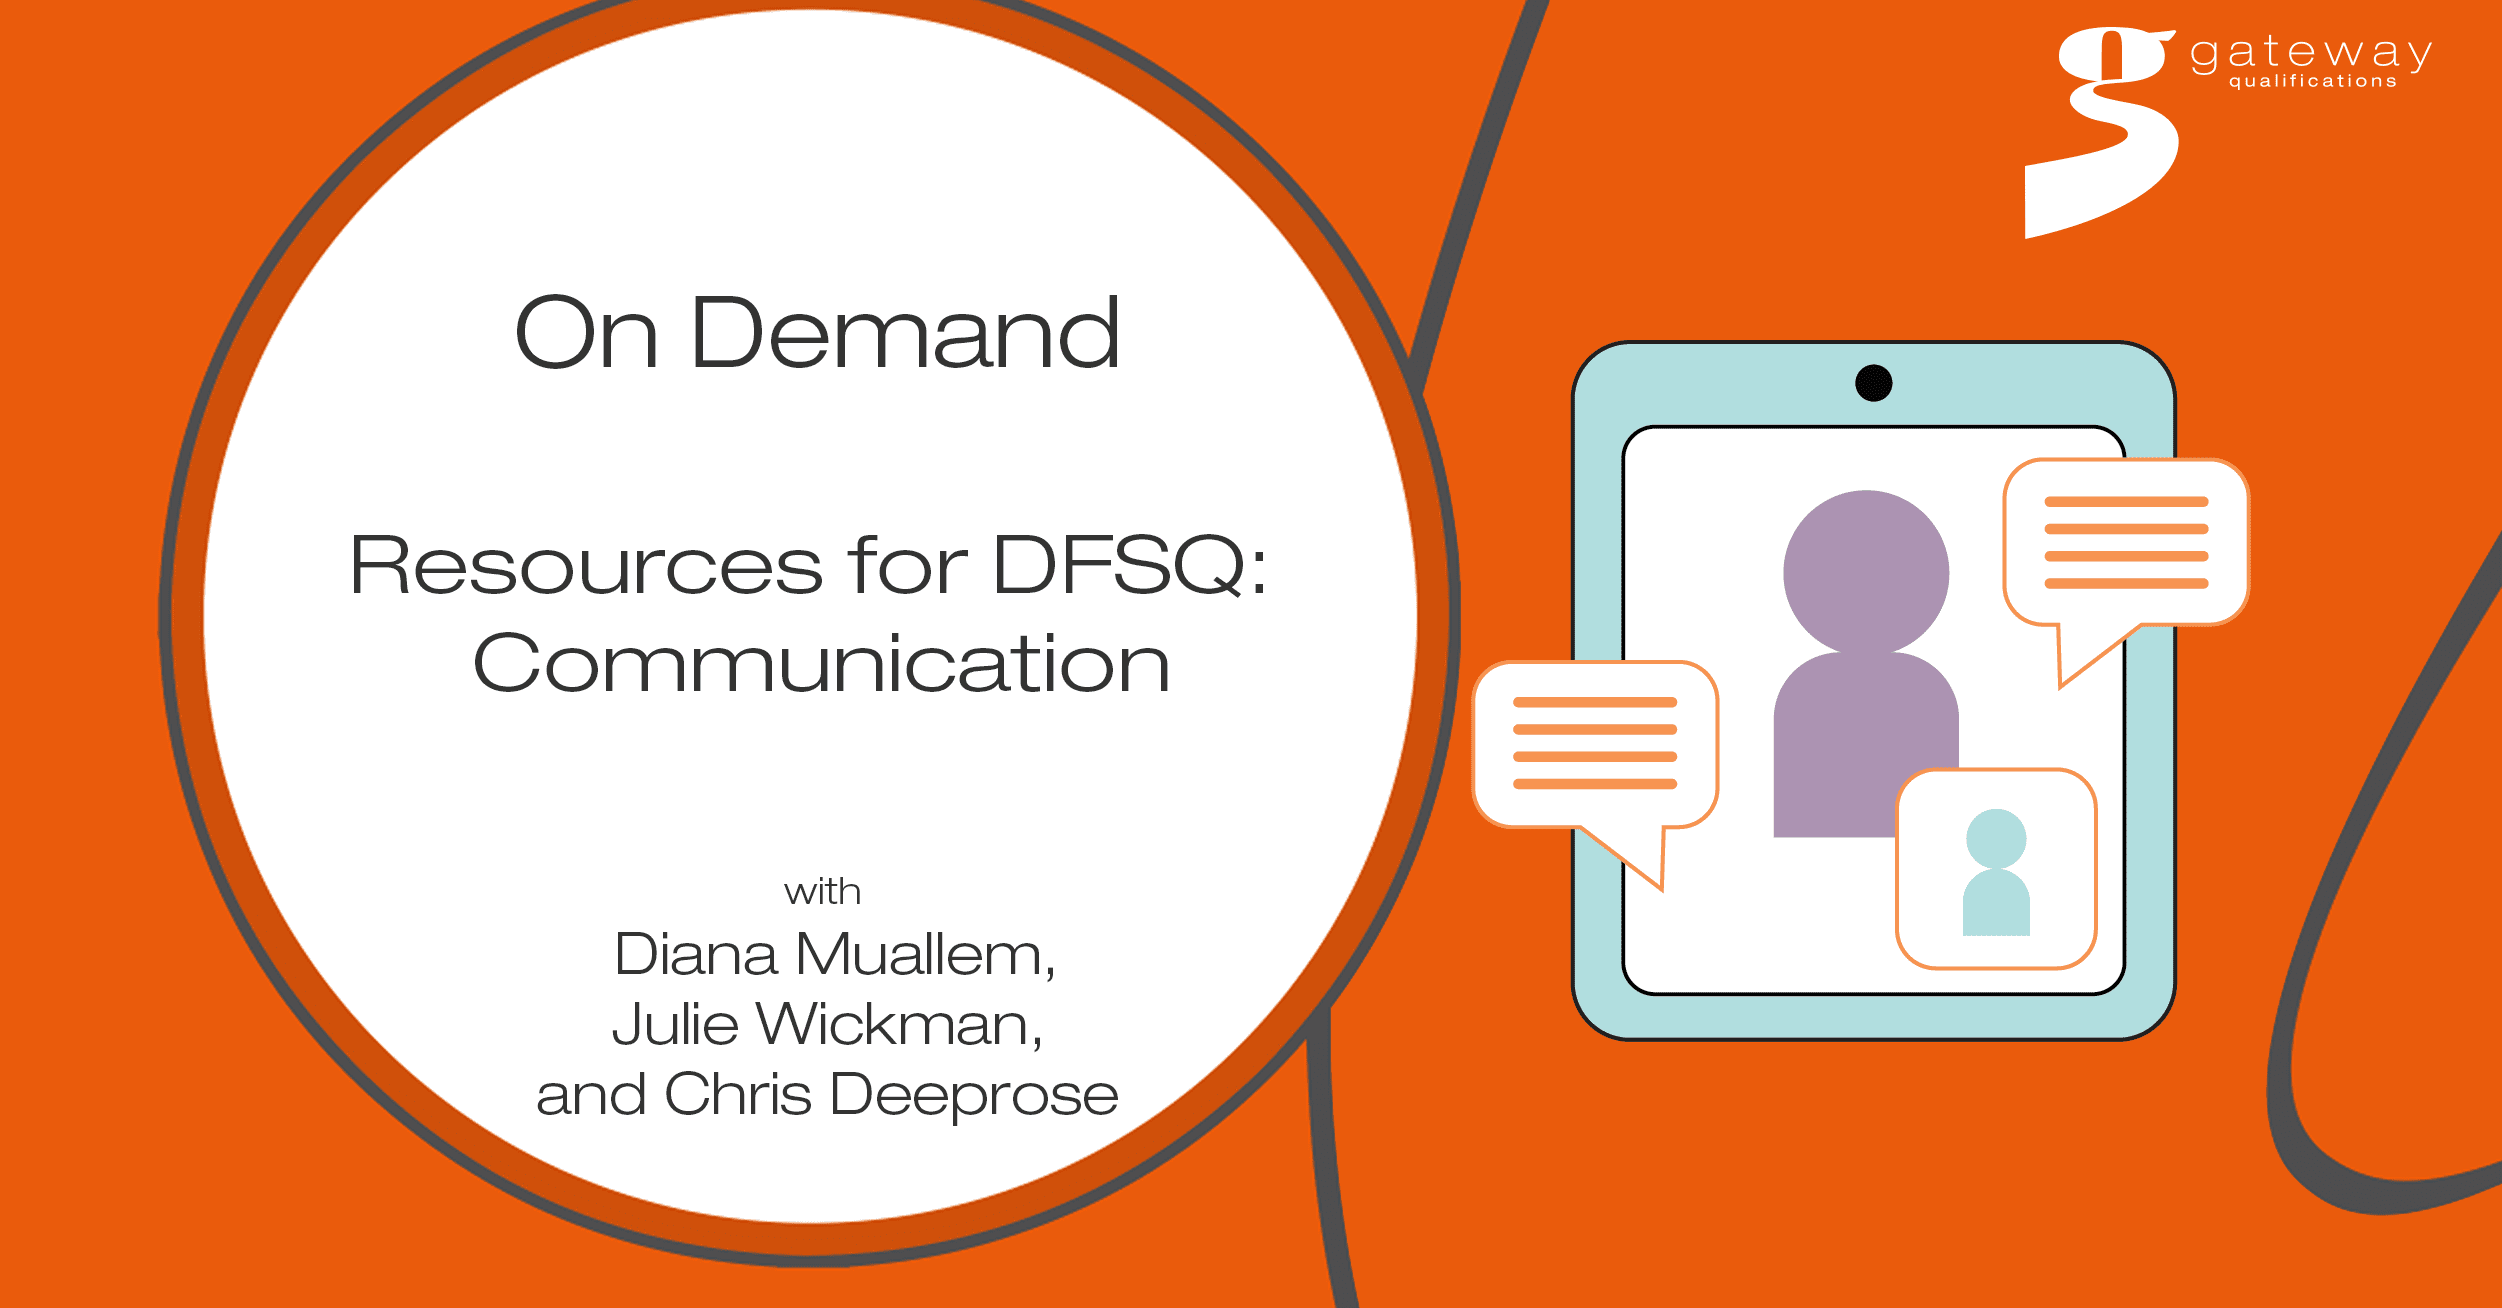 Resources for DFSQ - Communication_on demand